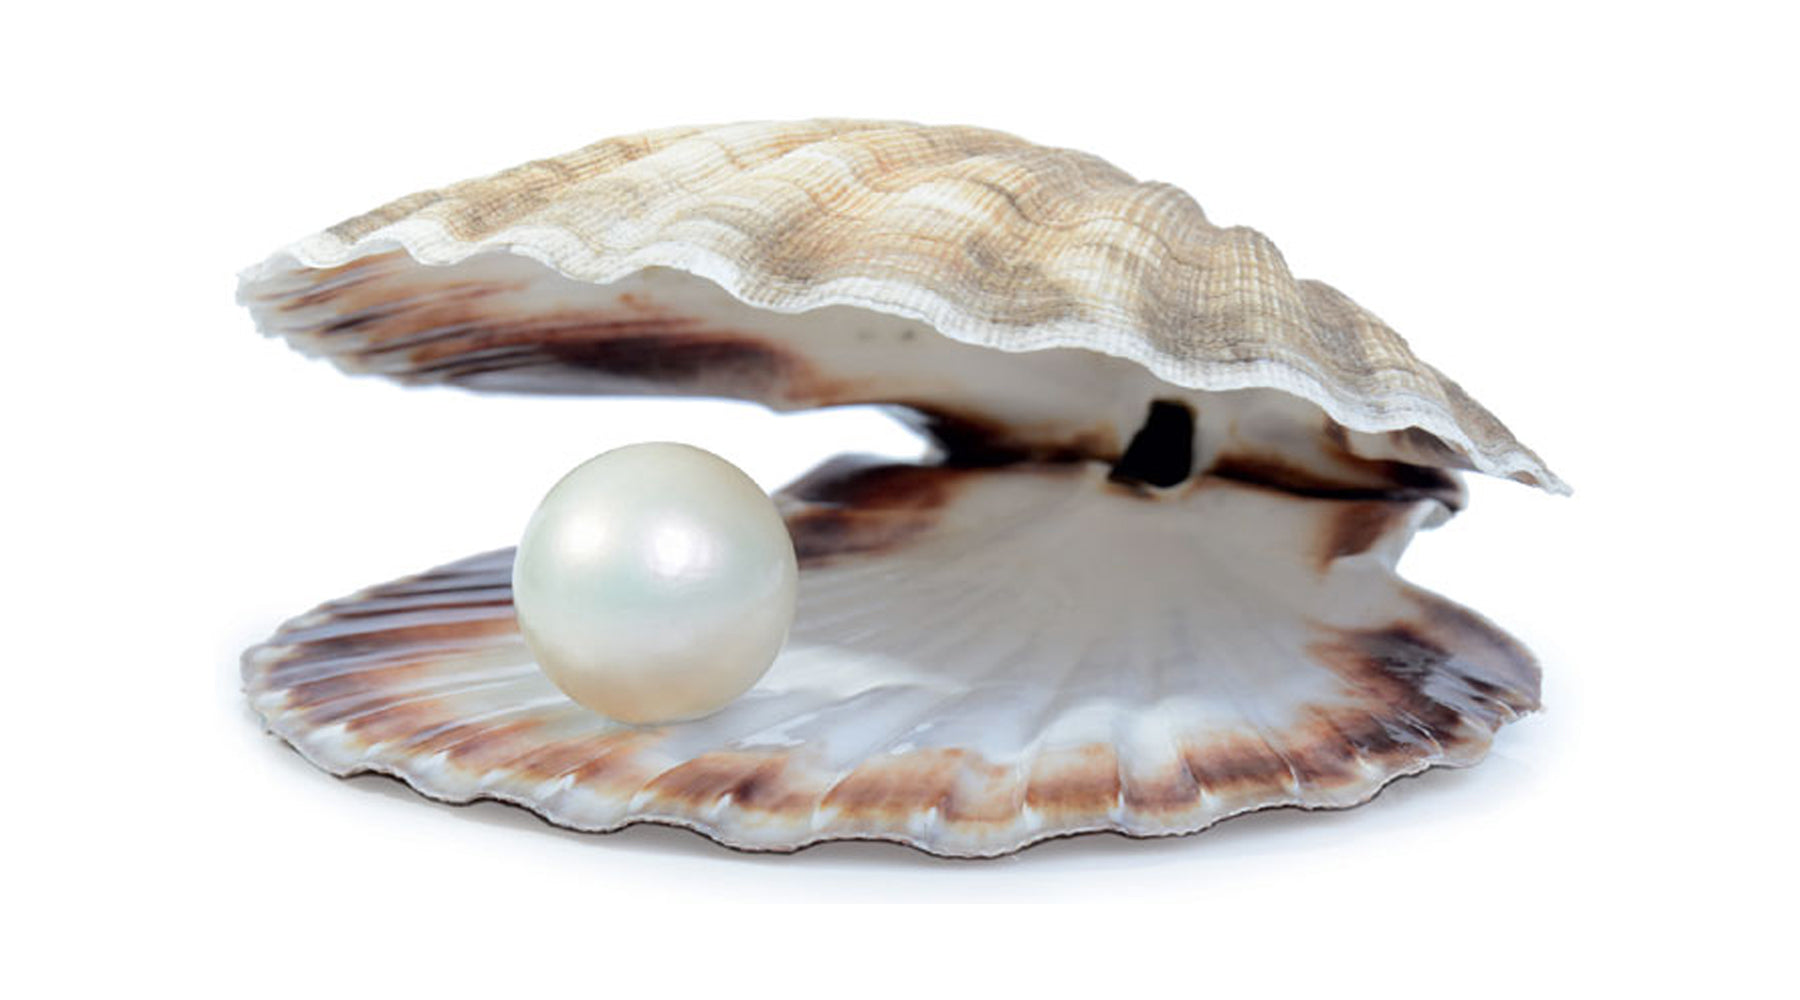 Does Every Oyster Have A Pearl?